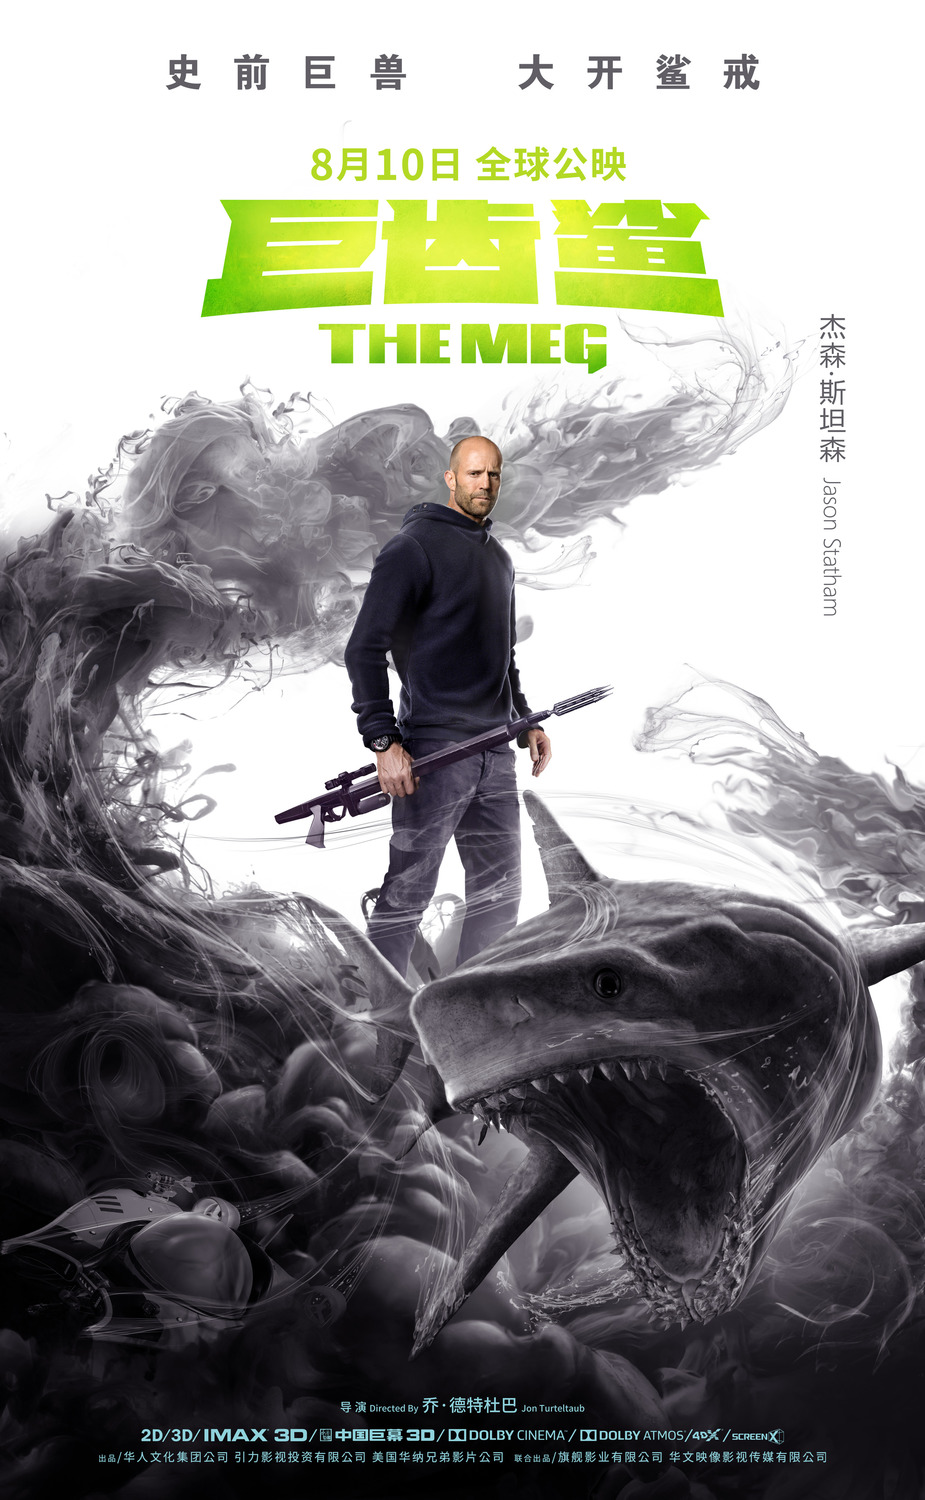 Extra Large Movie Poster Image for The Meg (#26 of 26)